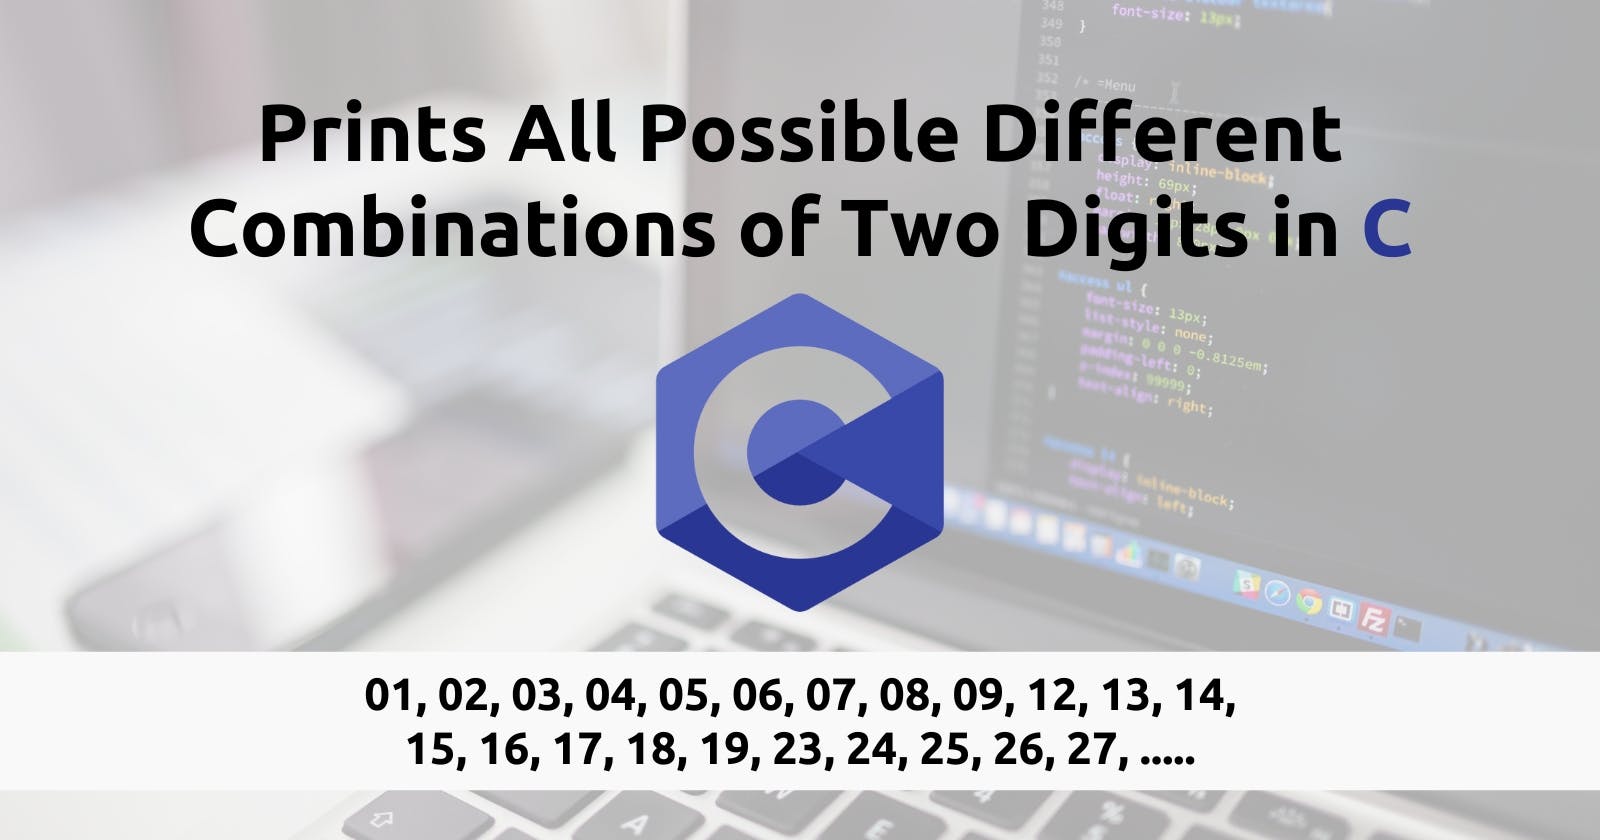 How to Write a Program That Prints All Possible Different Combinations of Two Digits in C